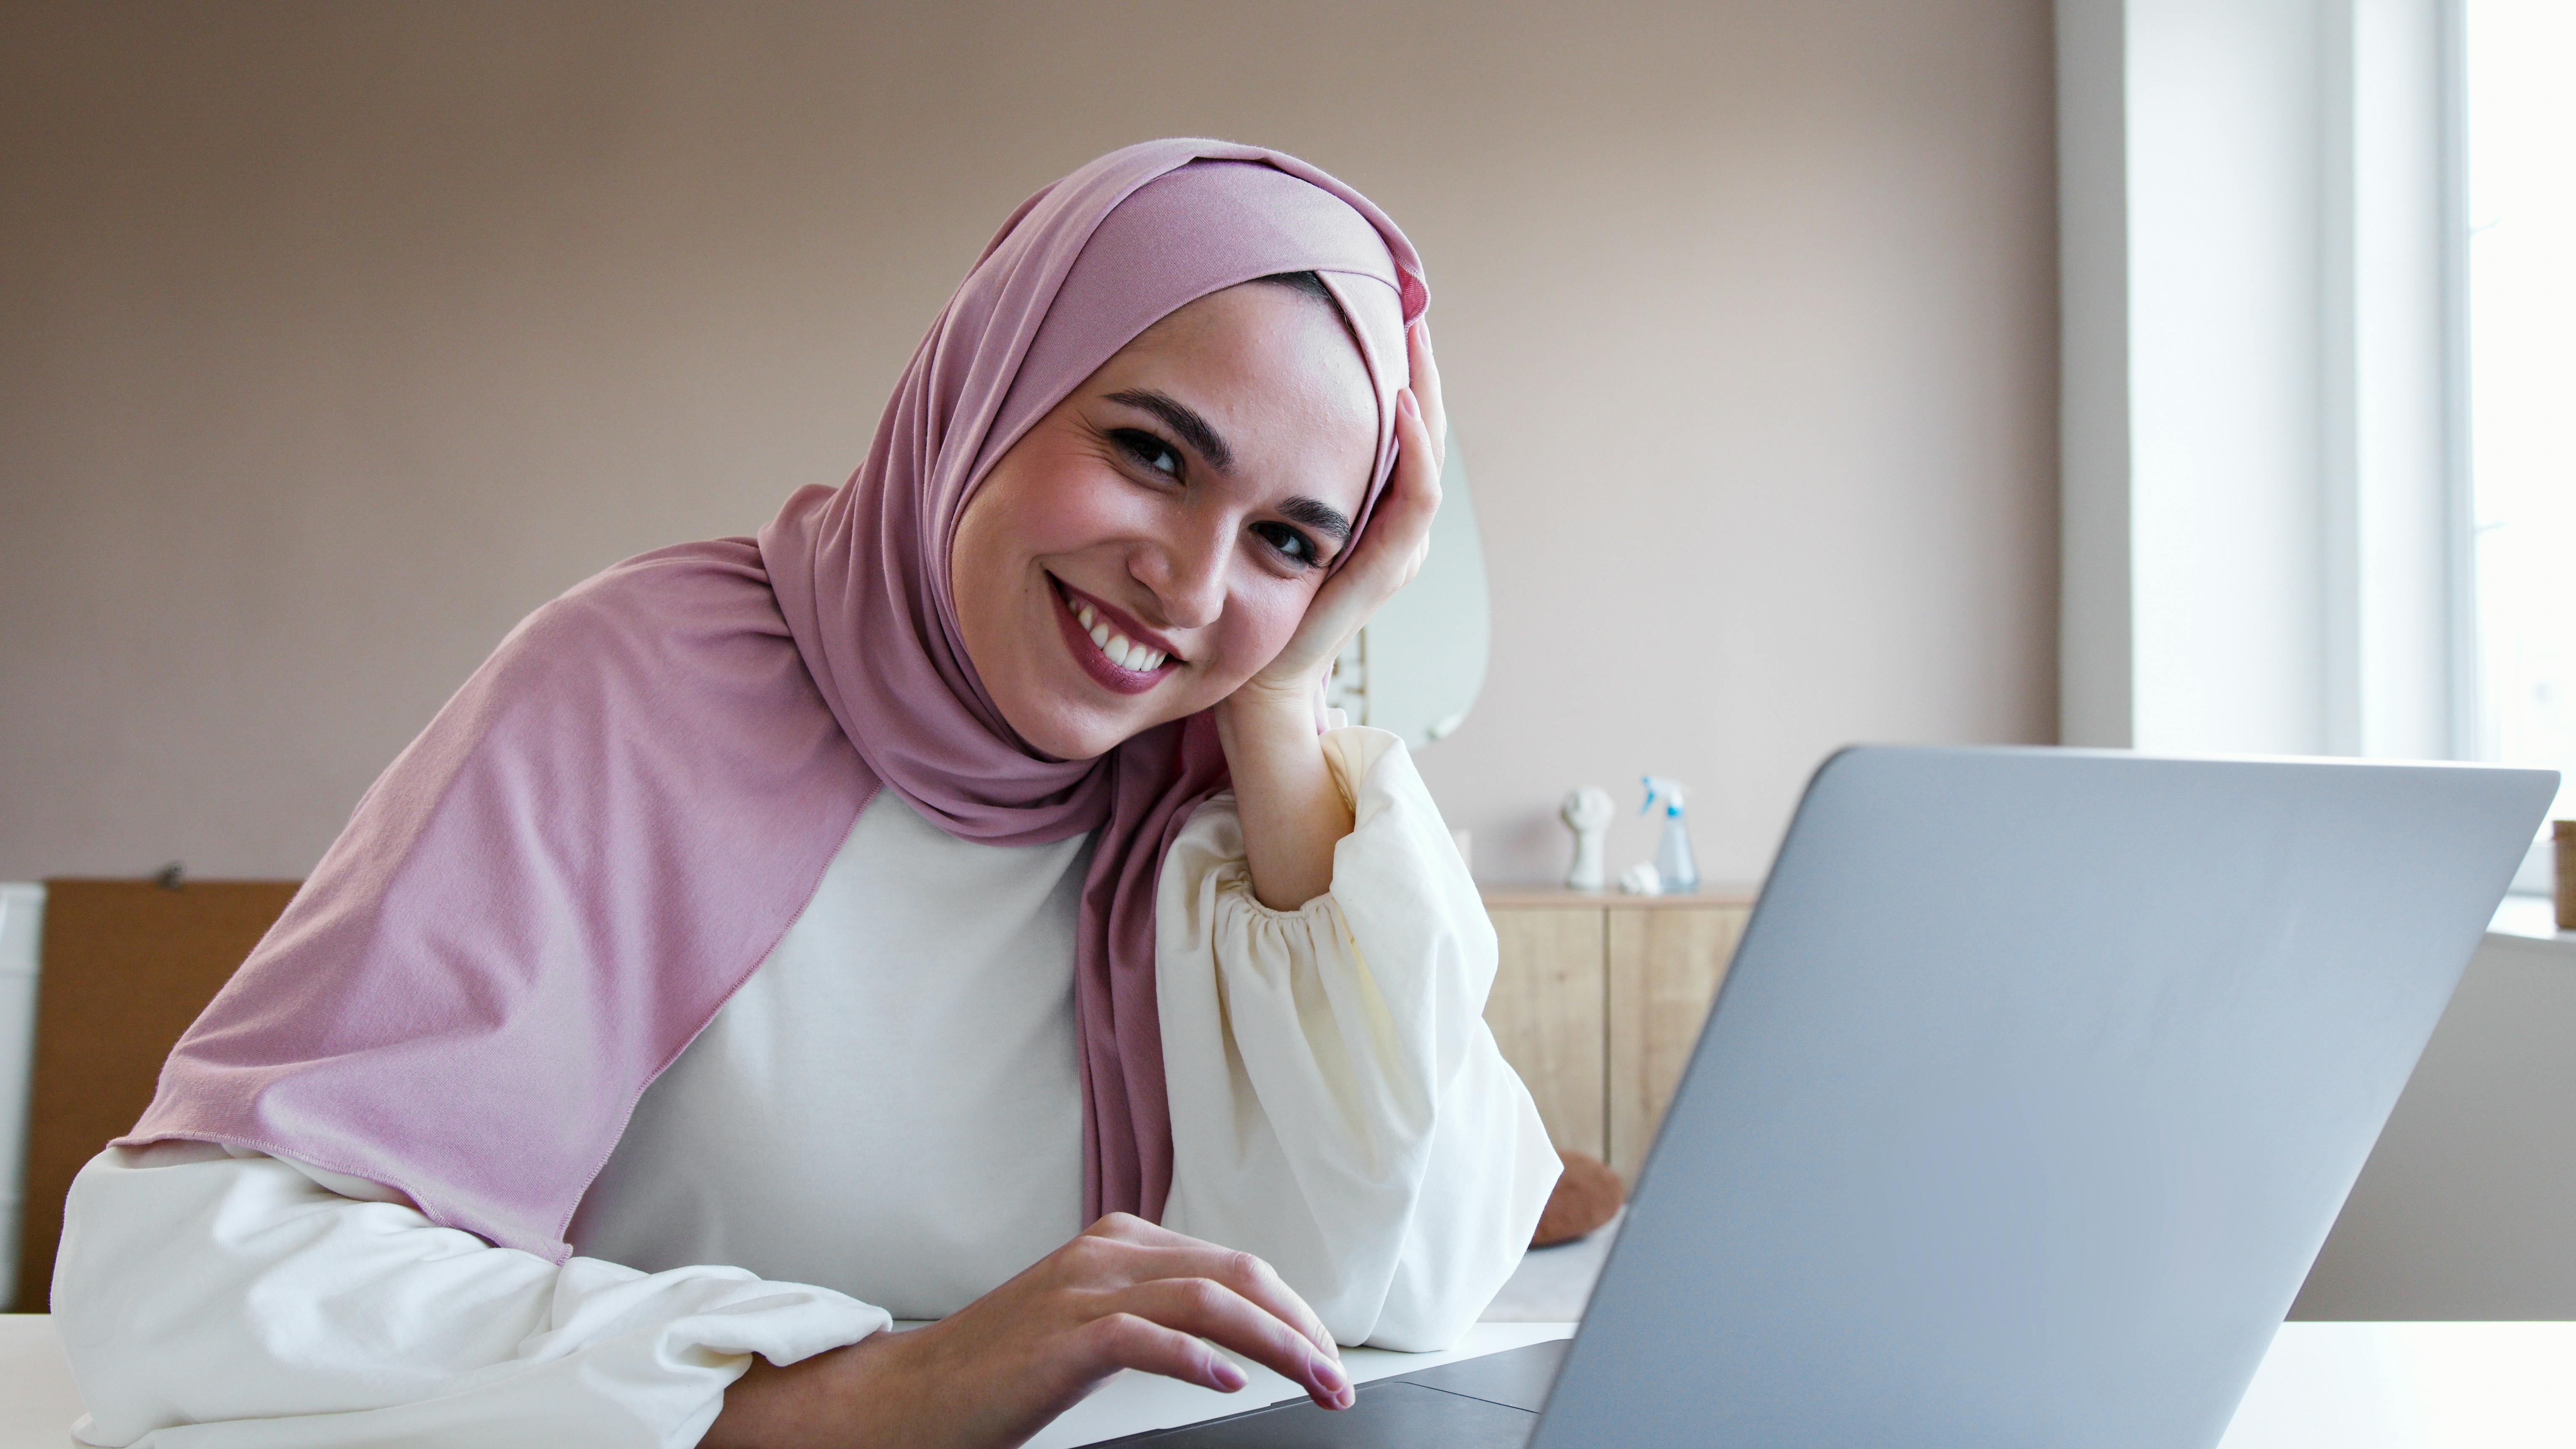 a woman in white long sleeves and pink hijab smiling